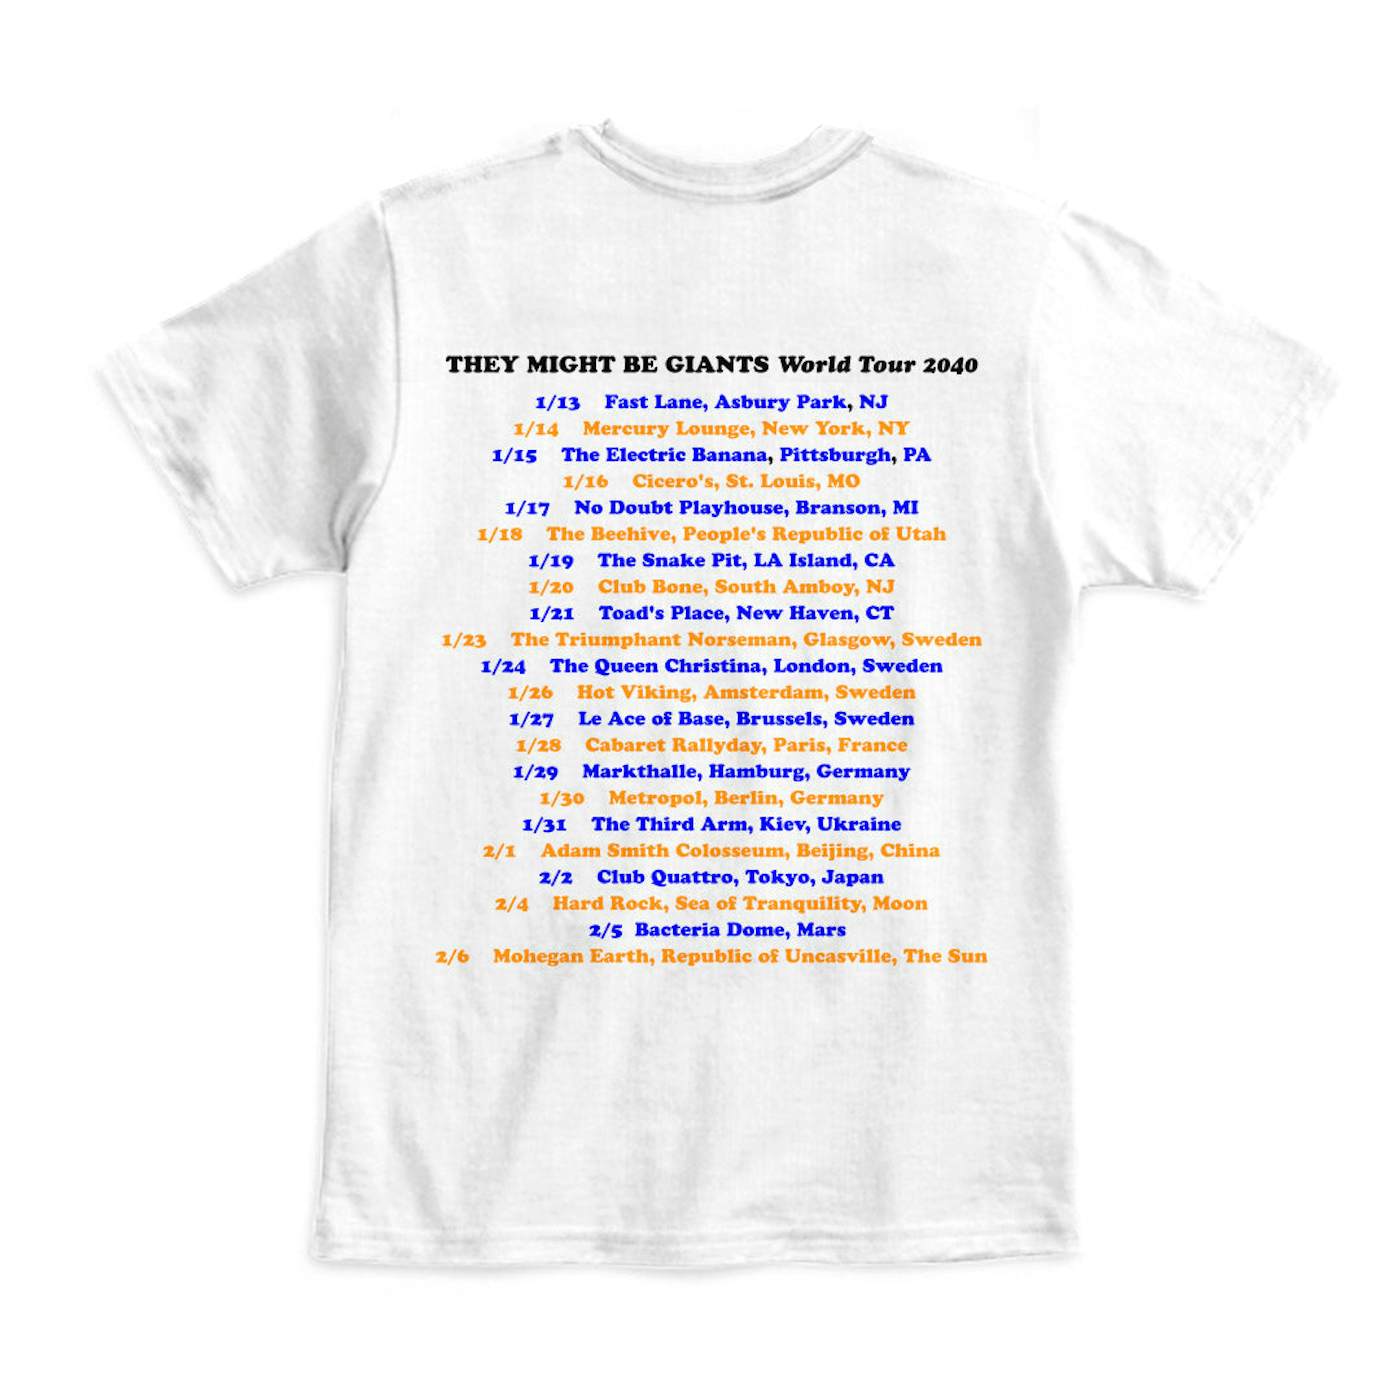 They Might Be Giants 2040 World Tour (Unisex)